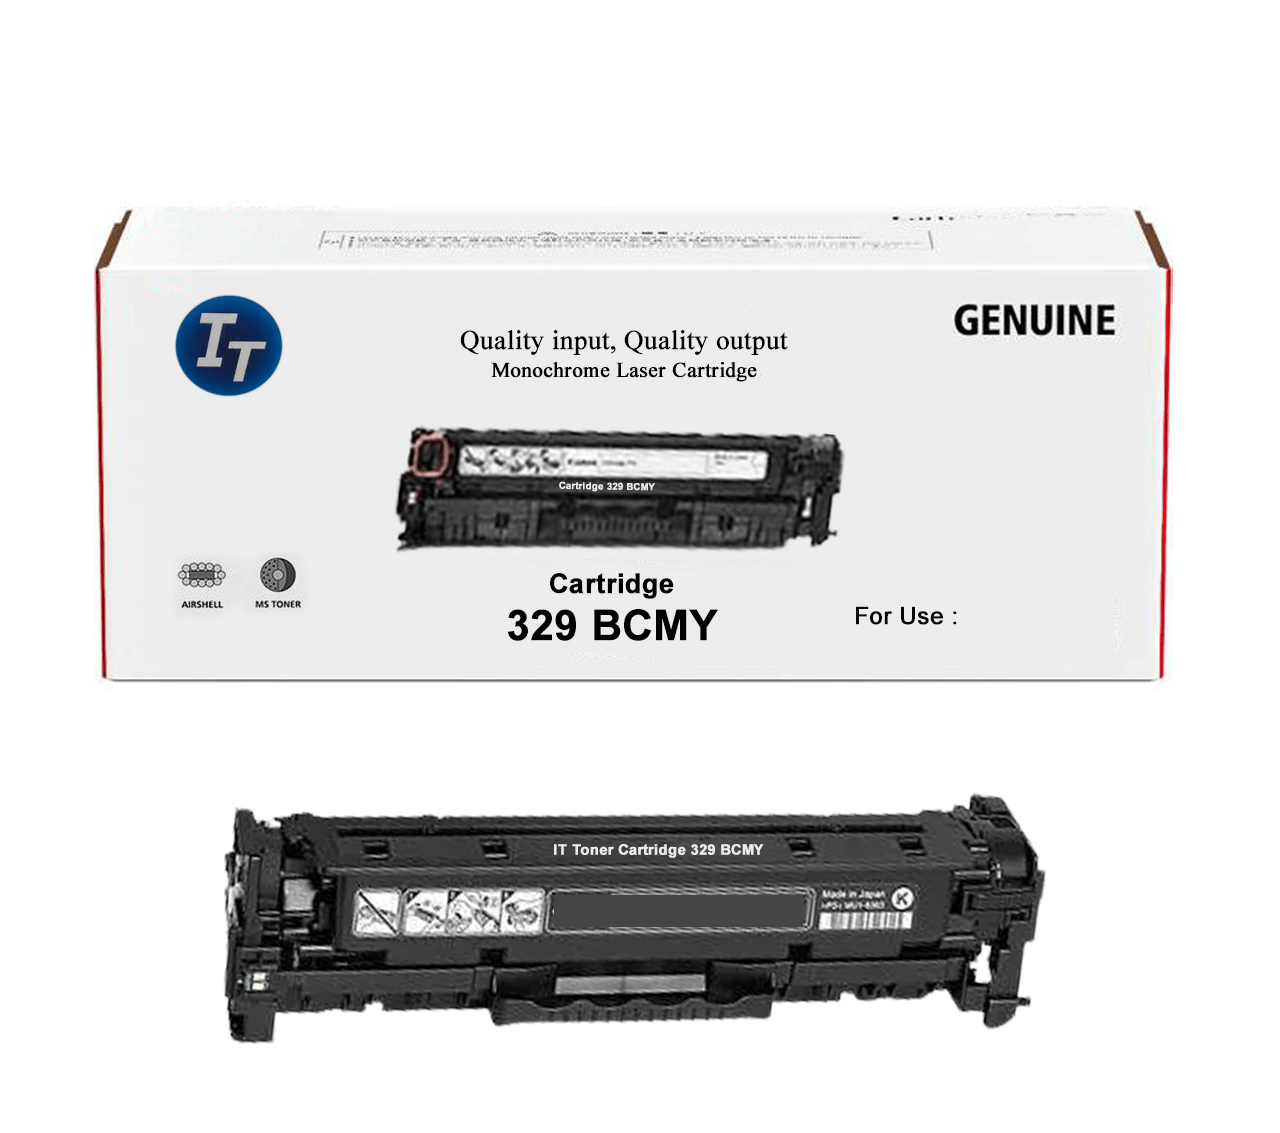 IT Toner Cartridge Canon 329 BCMY (9).png